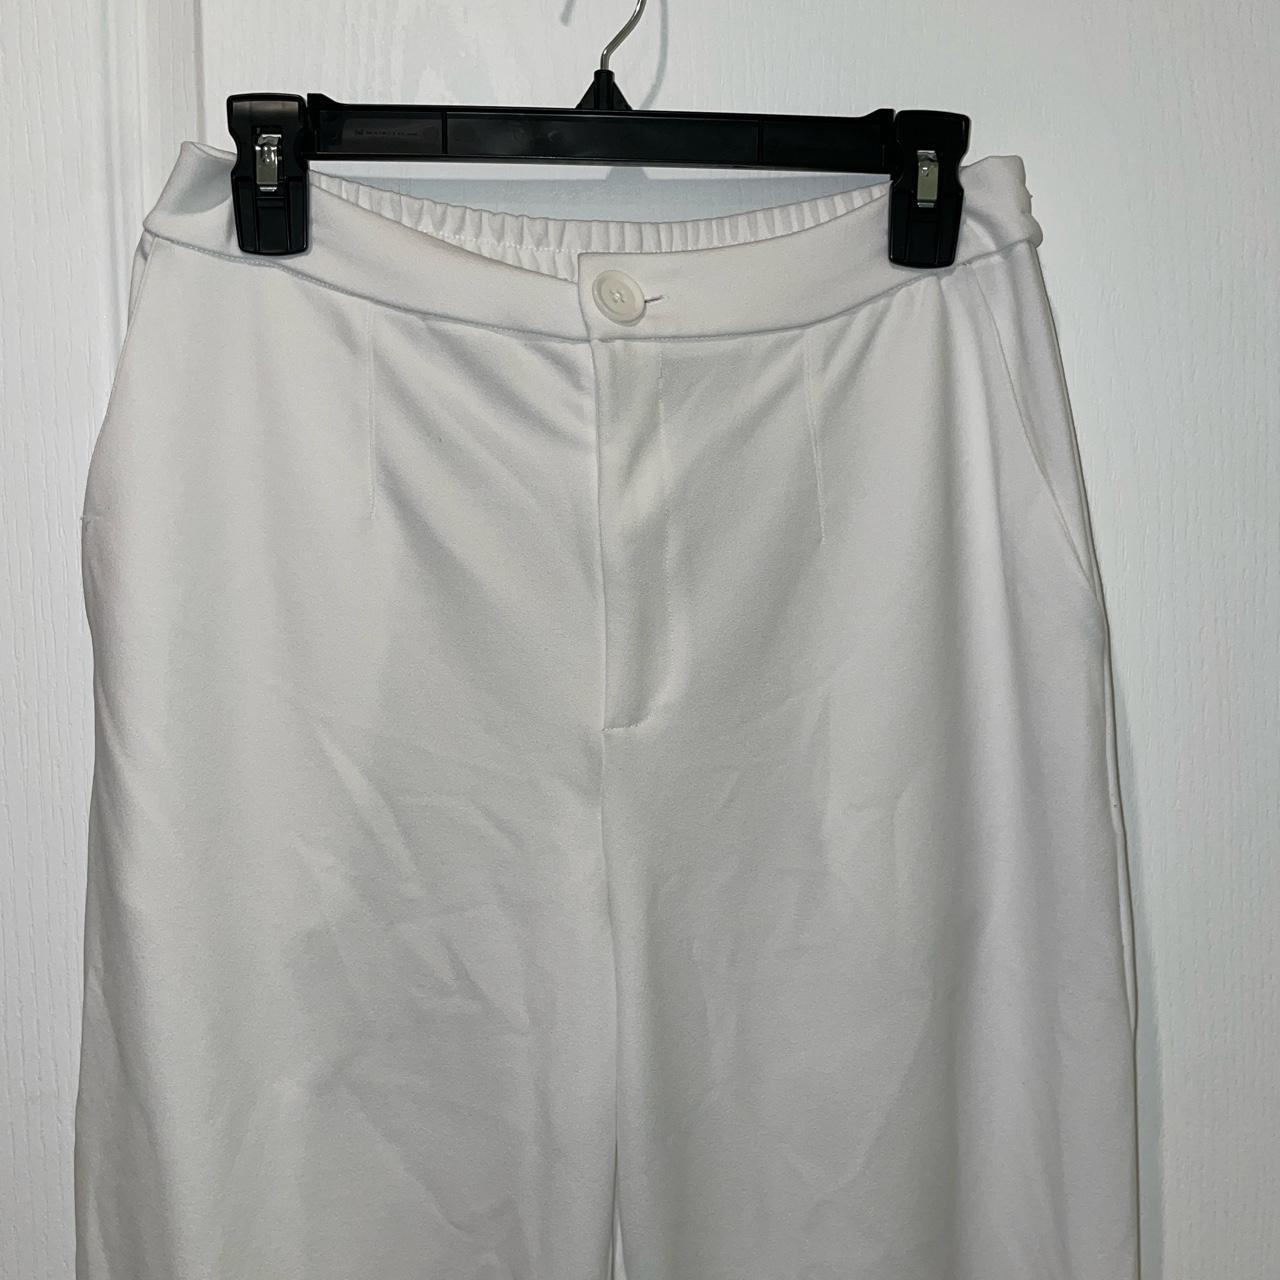 white flared high rise pants with stretchy material!... - Depop